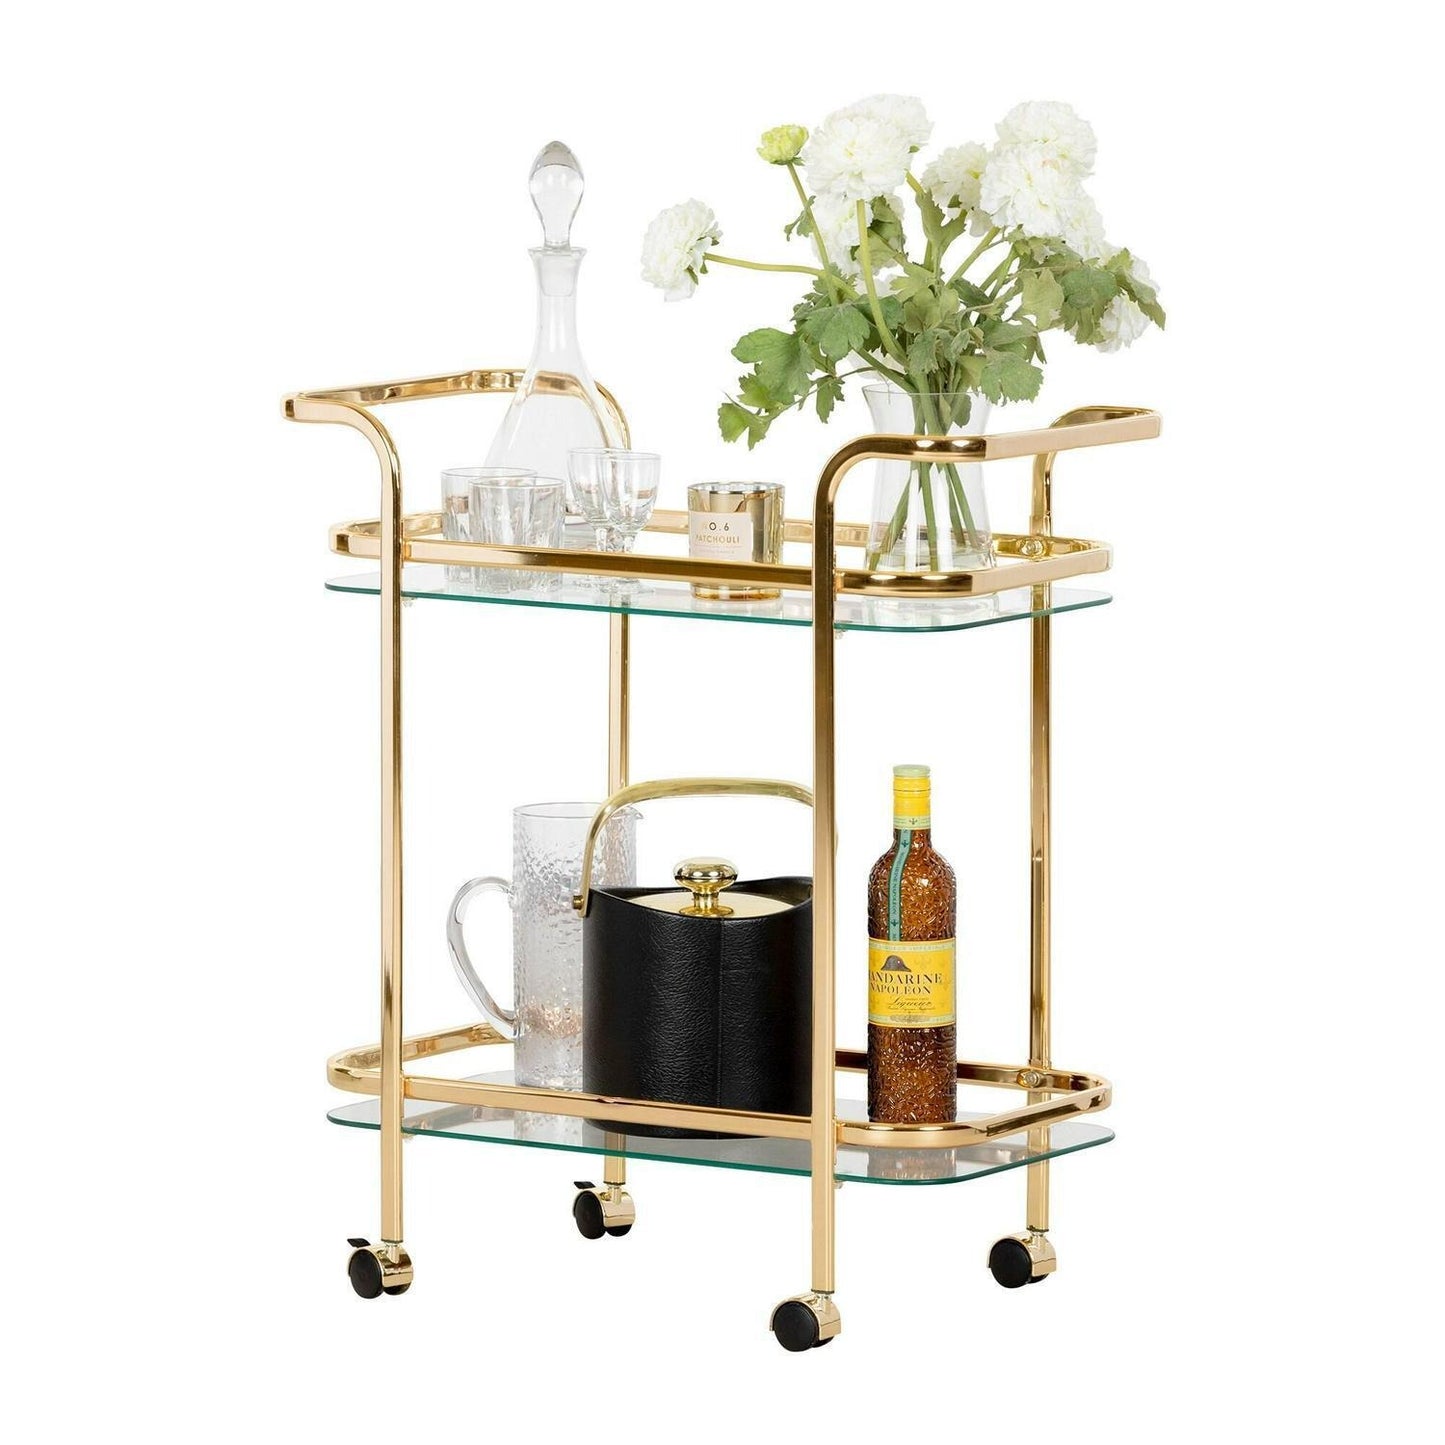 Modernist Gold Finish Metal and Glass Serving Wine and Tea Cart